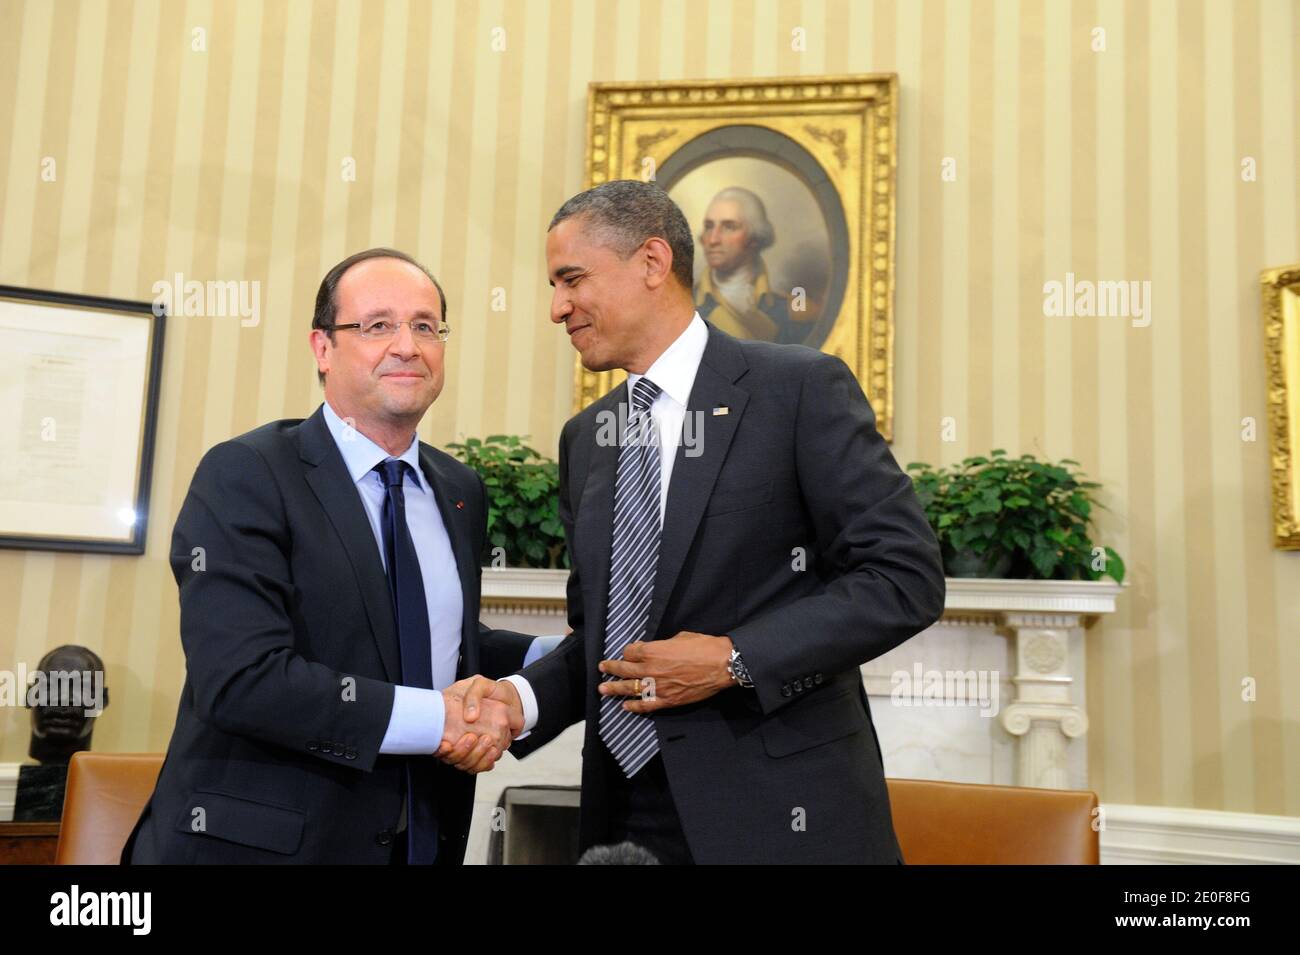 US President Barack Obama holds a bilateral meeting with French President Francois Hollande in advance of the G-8 and NATO Summits in the Oval Office of the White House in Washington, DC, USA on May 18, 2012. The two Presidents discussed their cooperation on a range of key topics, to include the global economy and Afghanistan. Photo by Jacques Witt/Pool/ABACAPRESS.COM Stock Photo